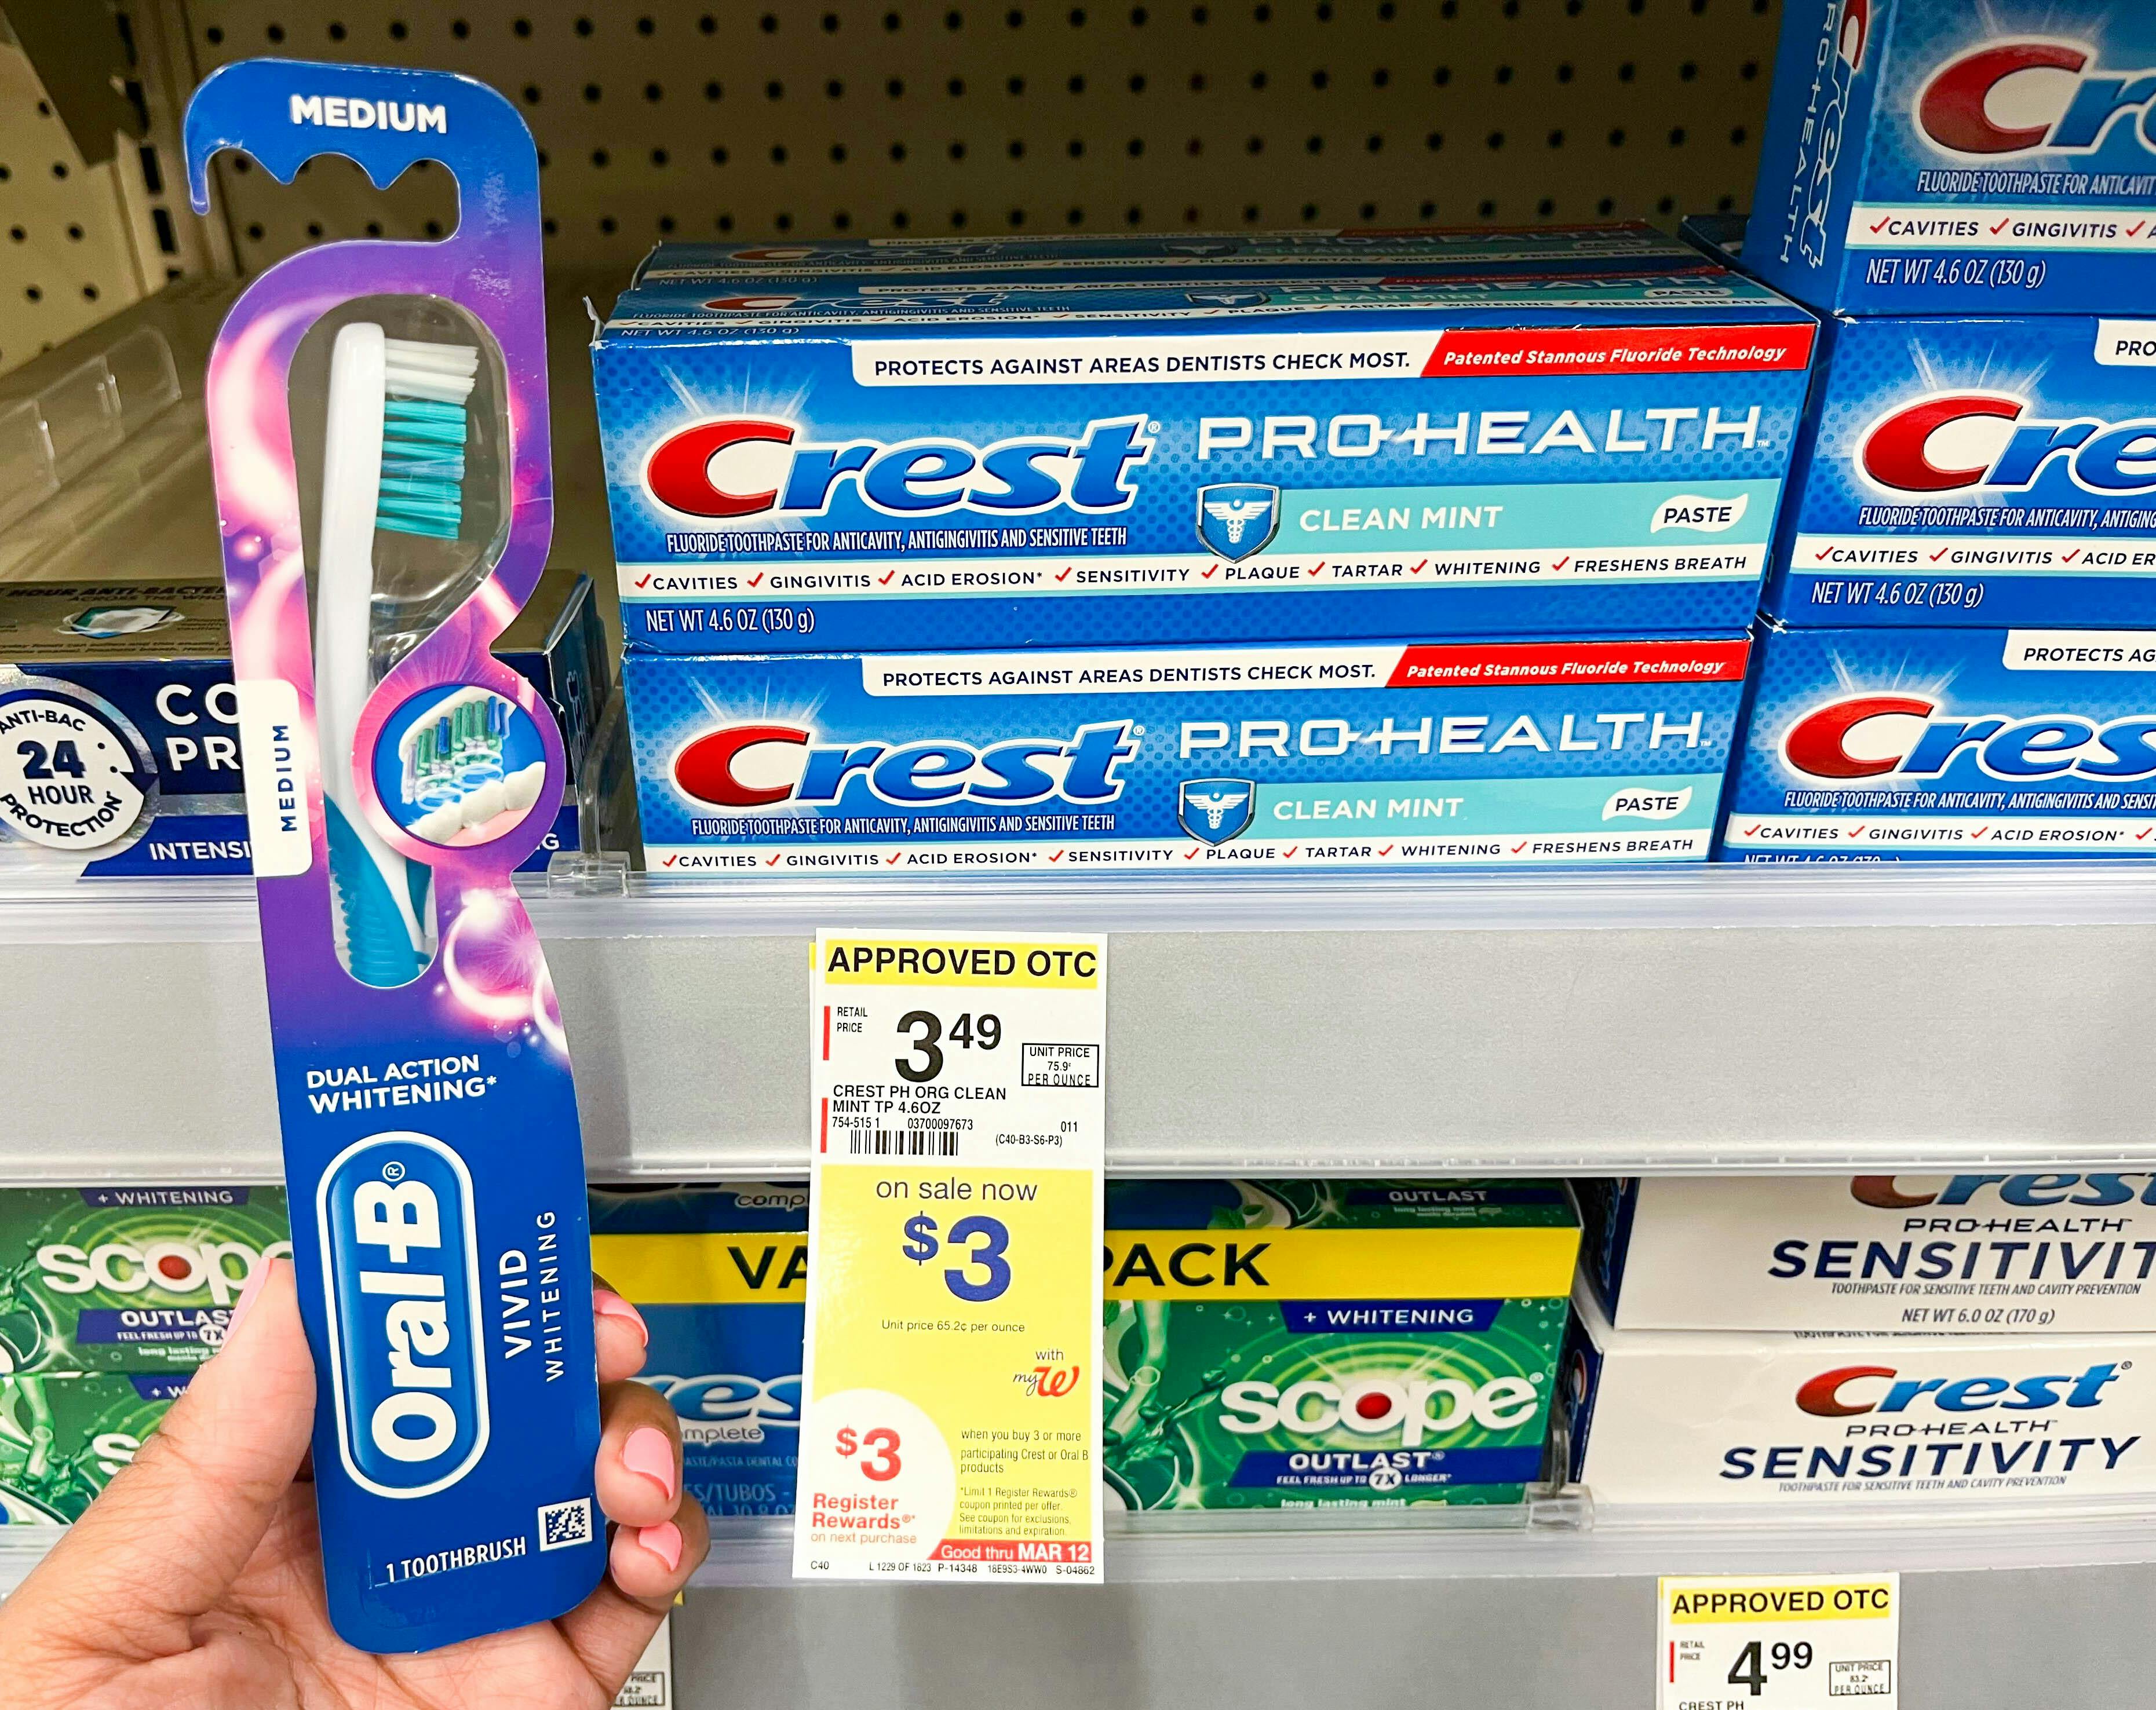 A person holding an oral-b toothbrush next to a shelf holding crest pro-health toothpaste